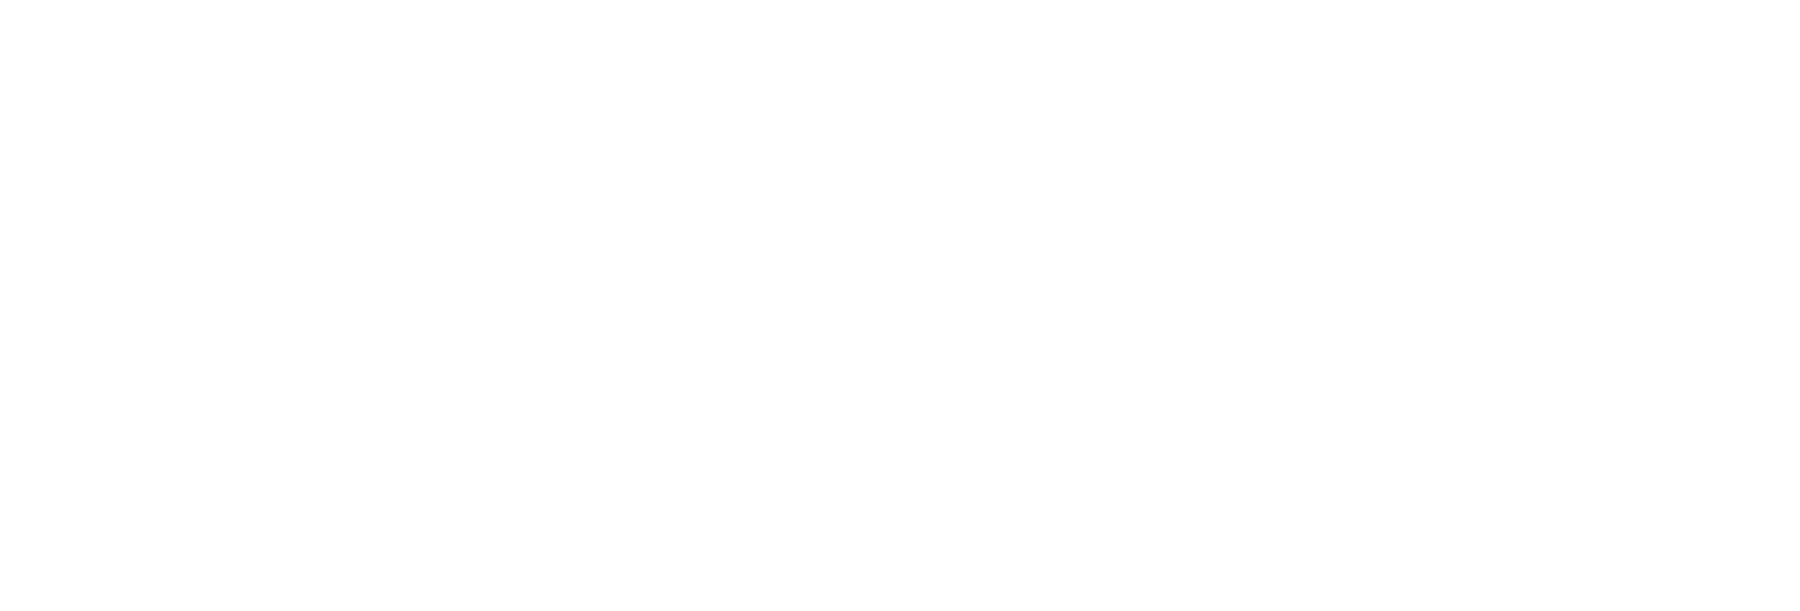 Betty White: First Lady of Television logo